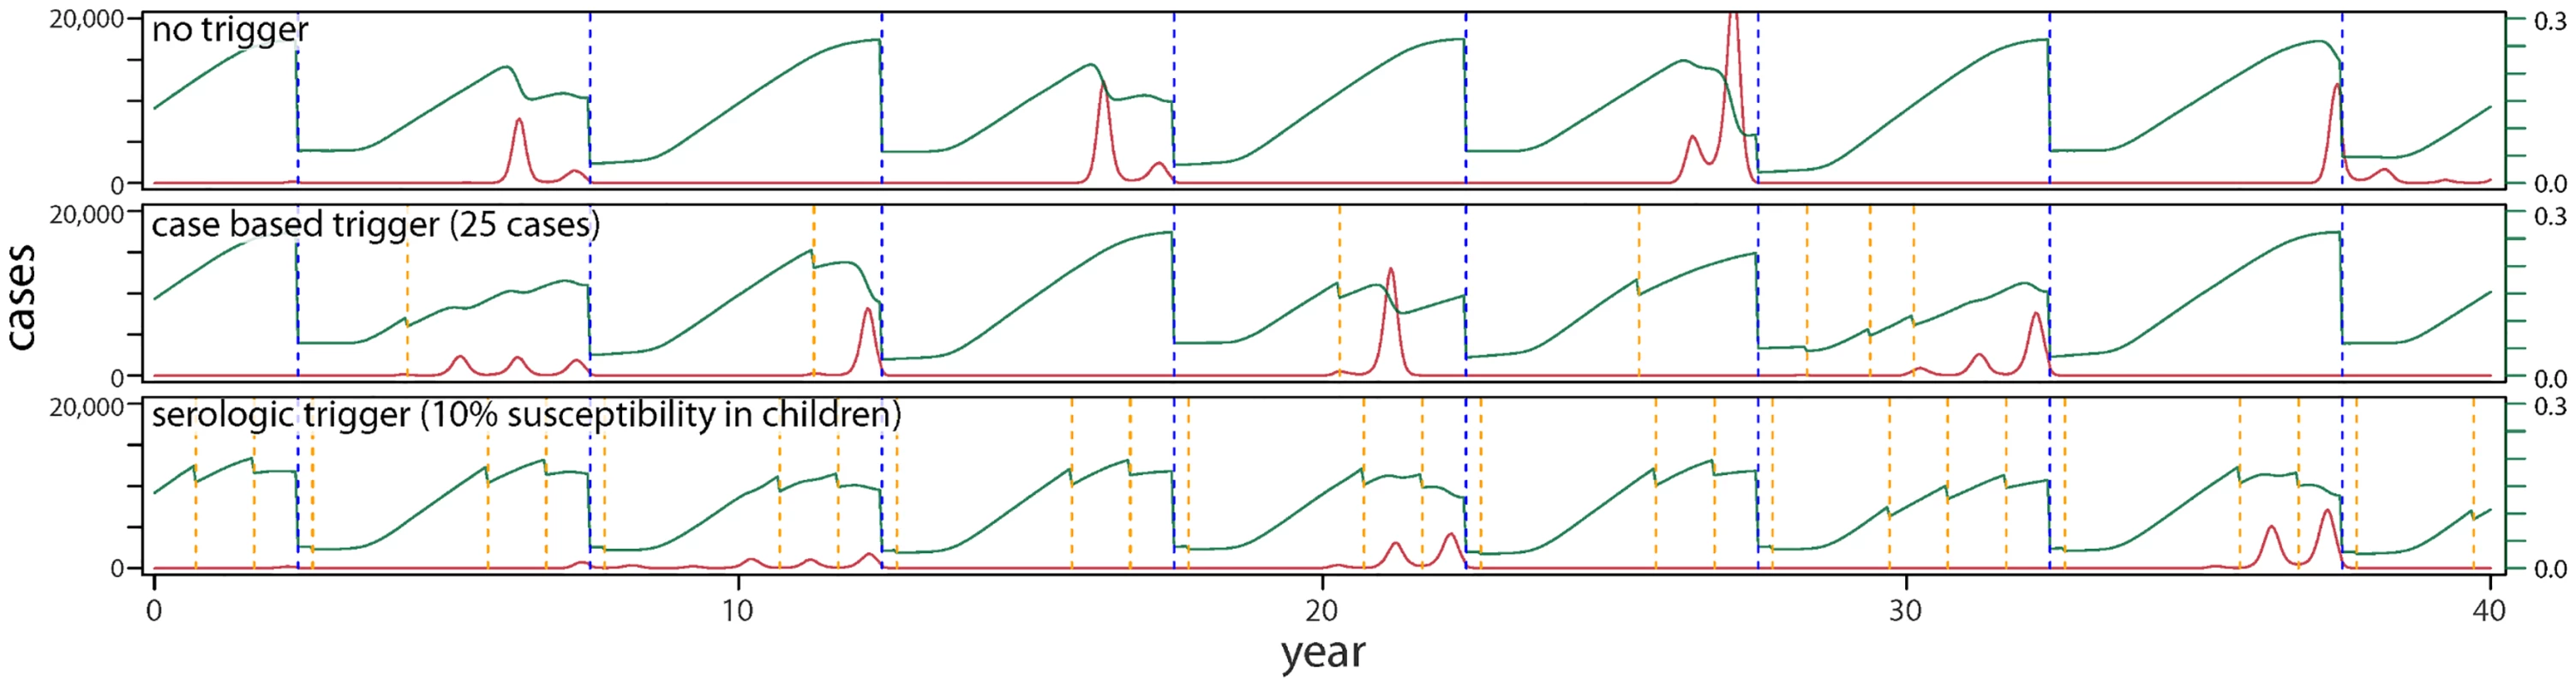 Typical time-series of incidence for three vaccination scenarios in a Yemen-like population: (i) a baseline scenario of routine vaccination combined with SIAs every 5 y; (ii) this baseline combined with campaigns that are triggered by a threshold number of cases; and (iii) this baseline combined with campaigns triggered by a threshold degree of serology in a target population age range.